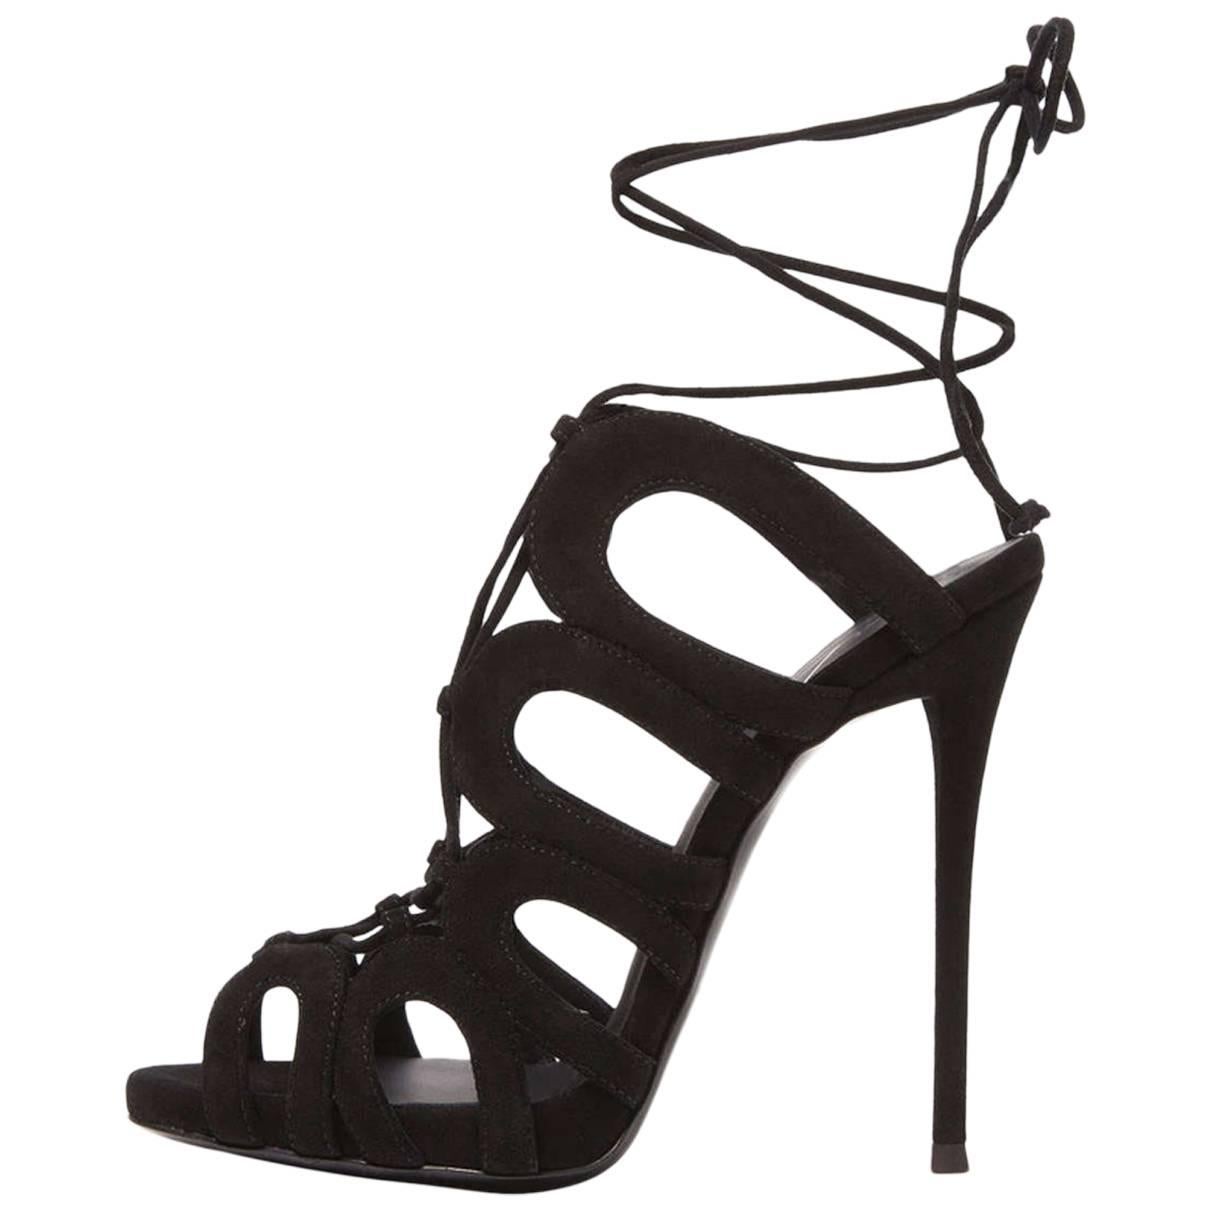 Giuseppe Zanotti New Black Suede Cut Out Ankle Tie Evening Sandals Heels in Box